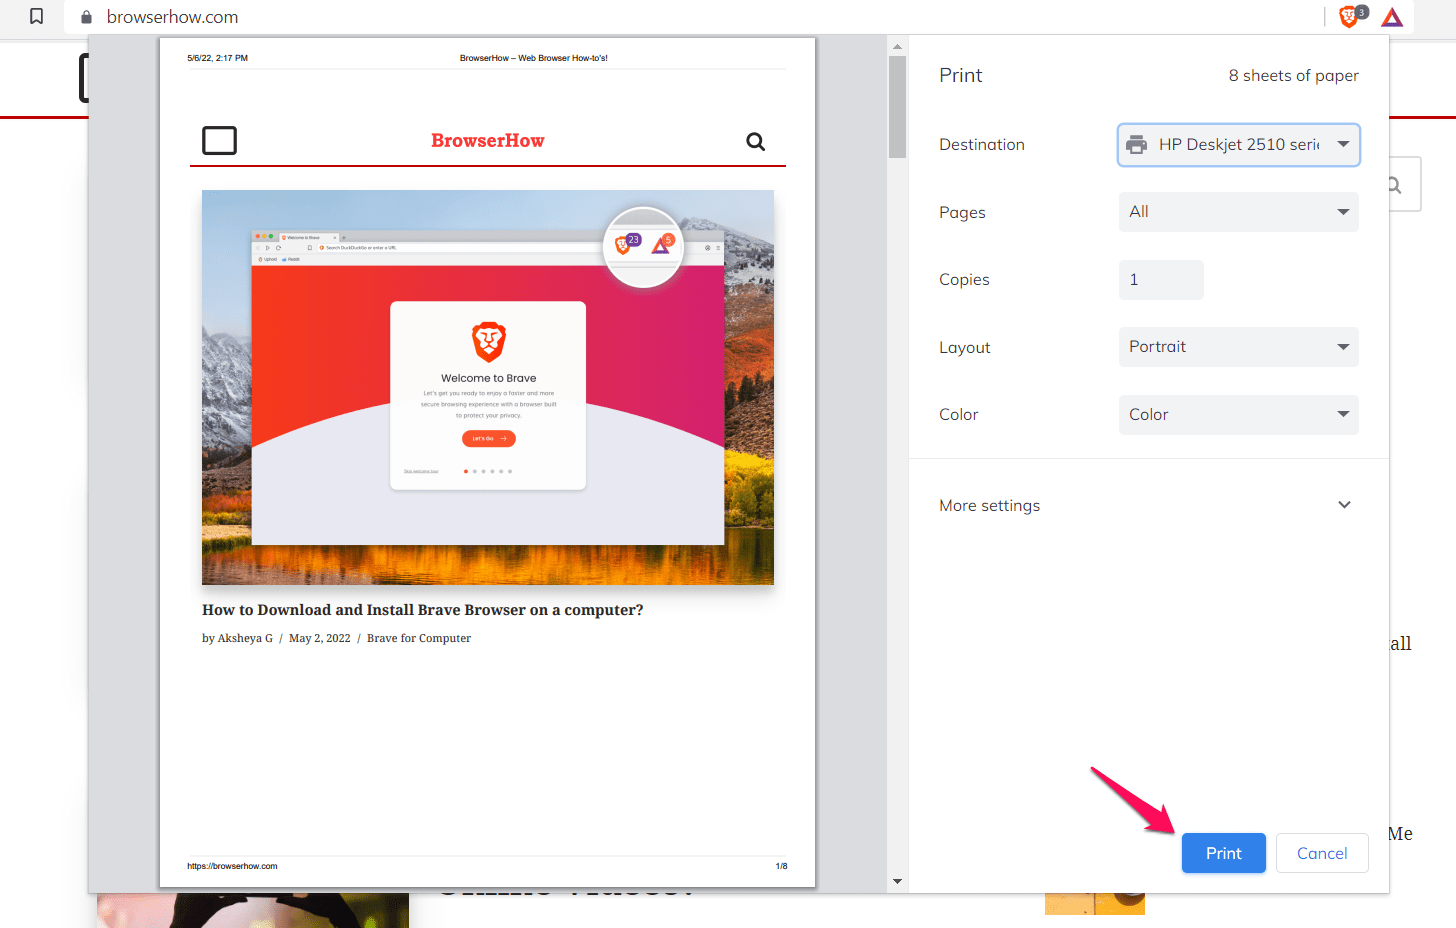 Print Command for Printing the Webpage on Brave Browser